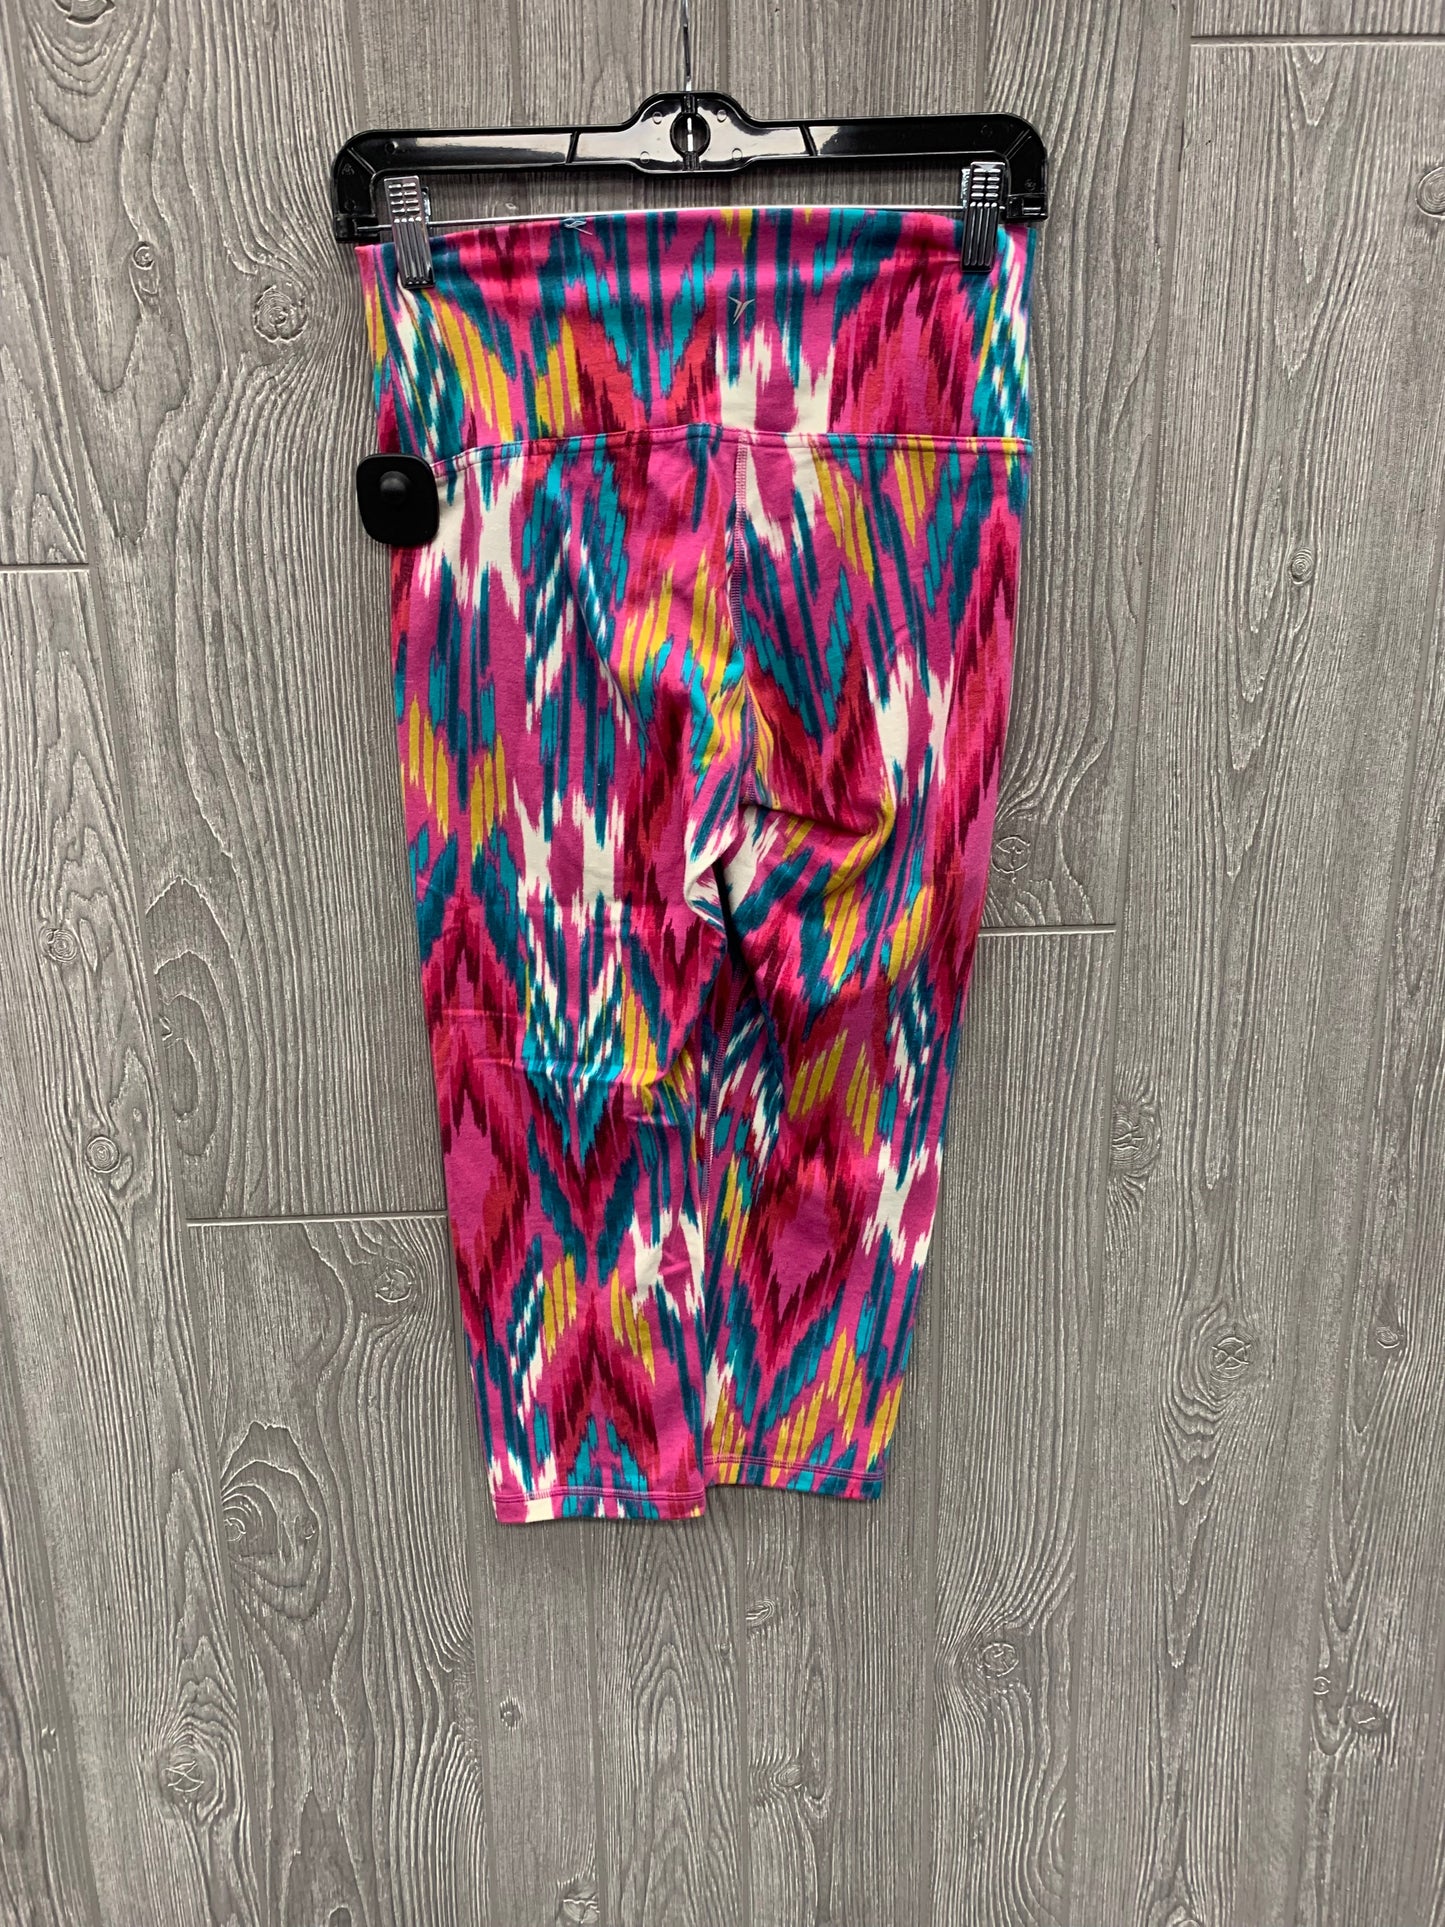 Athletic Leggings Capris By Old Navy  Size: M